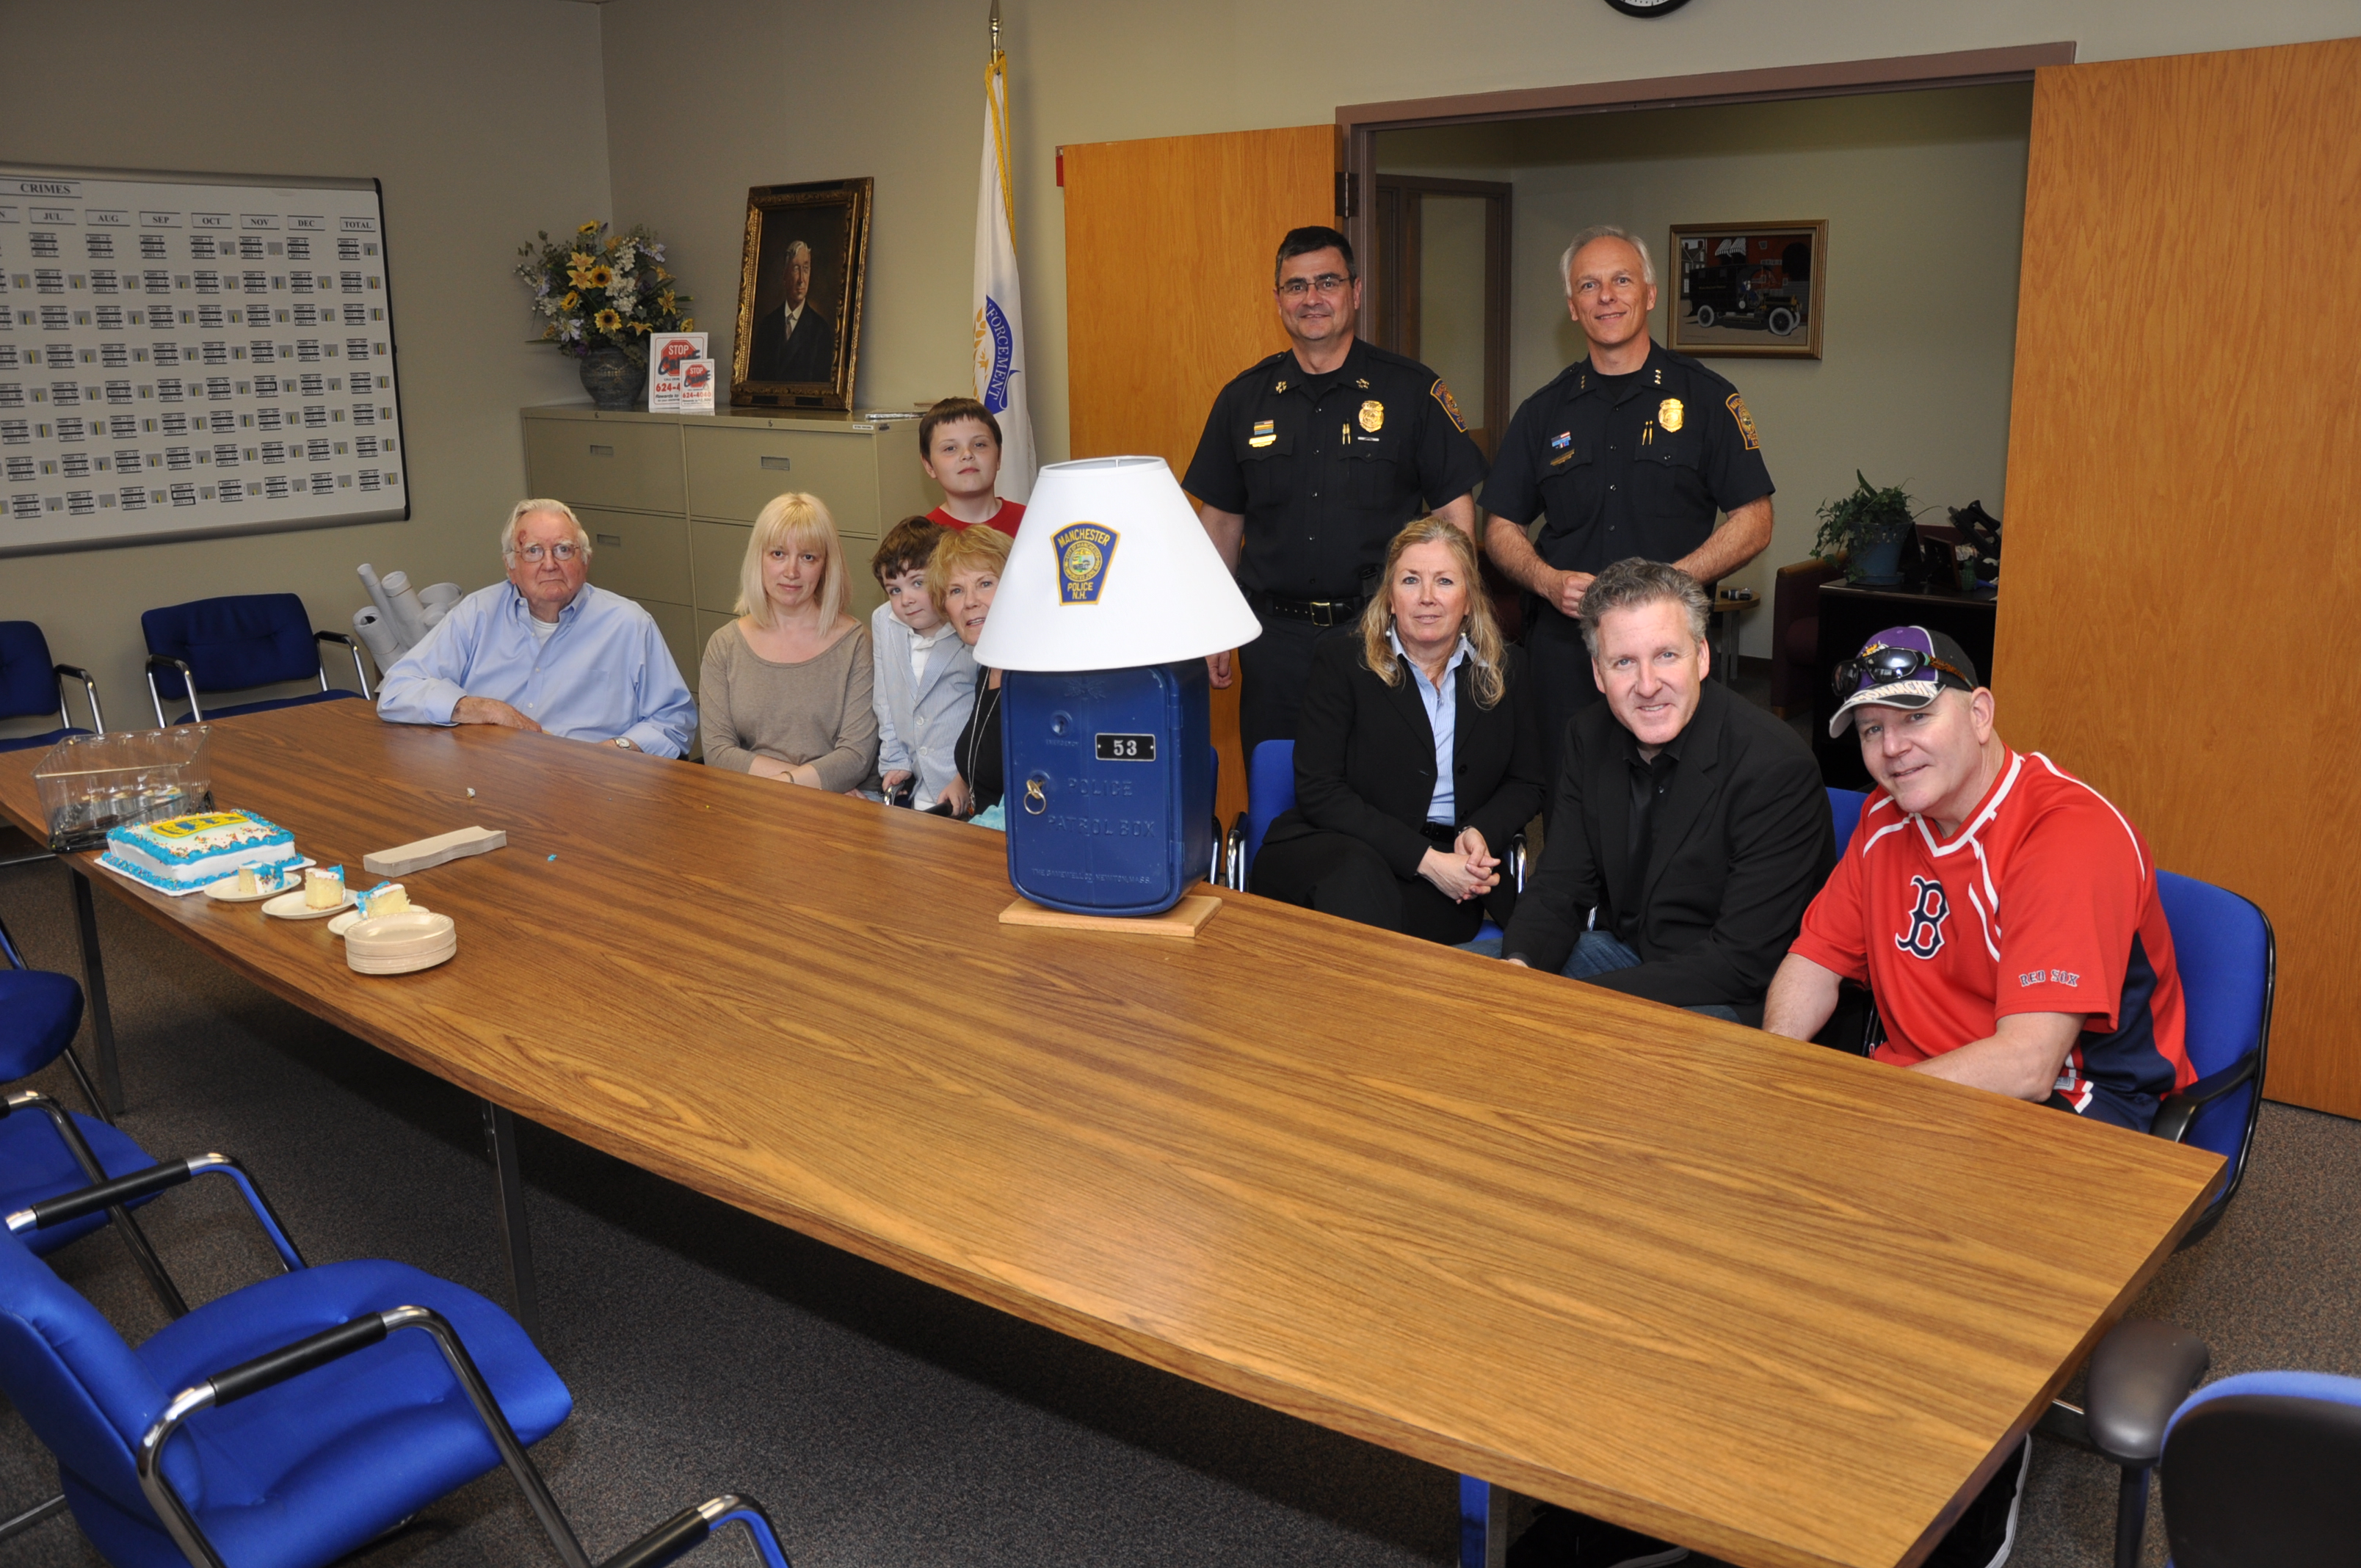 The Family of MPD’s “Chief for Life” Visit Station